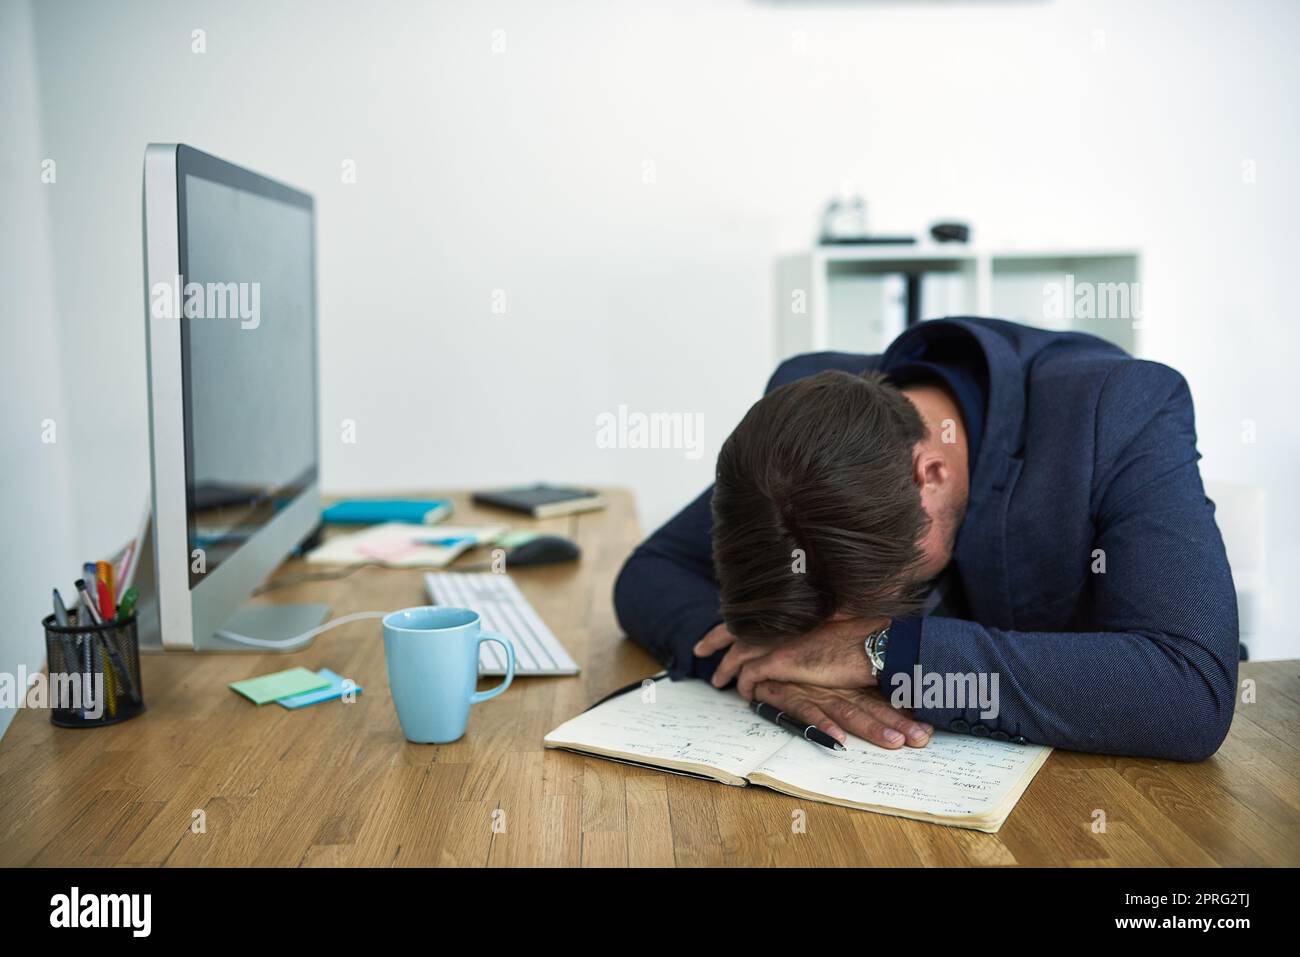 Out for the count at work. a stressed out businessman passed out at his desk. Stock Photo